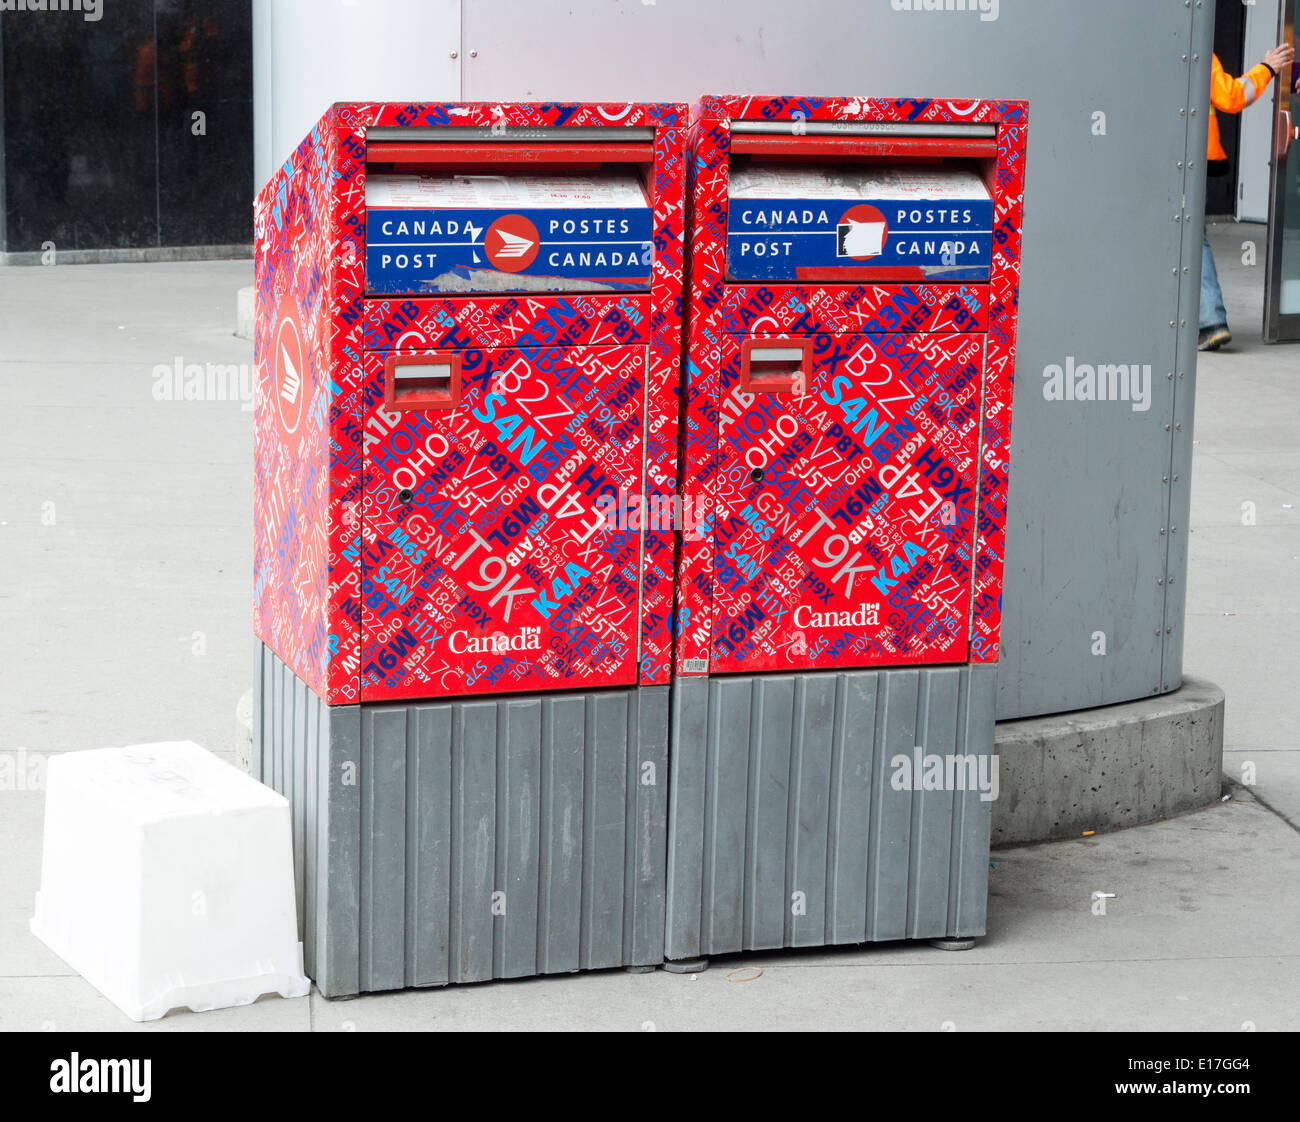 2 Canda Post Mailboxes covered in postal codes side by side in downtown Toronto with empty mail container next to them Stock Photo